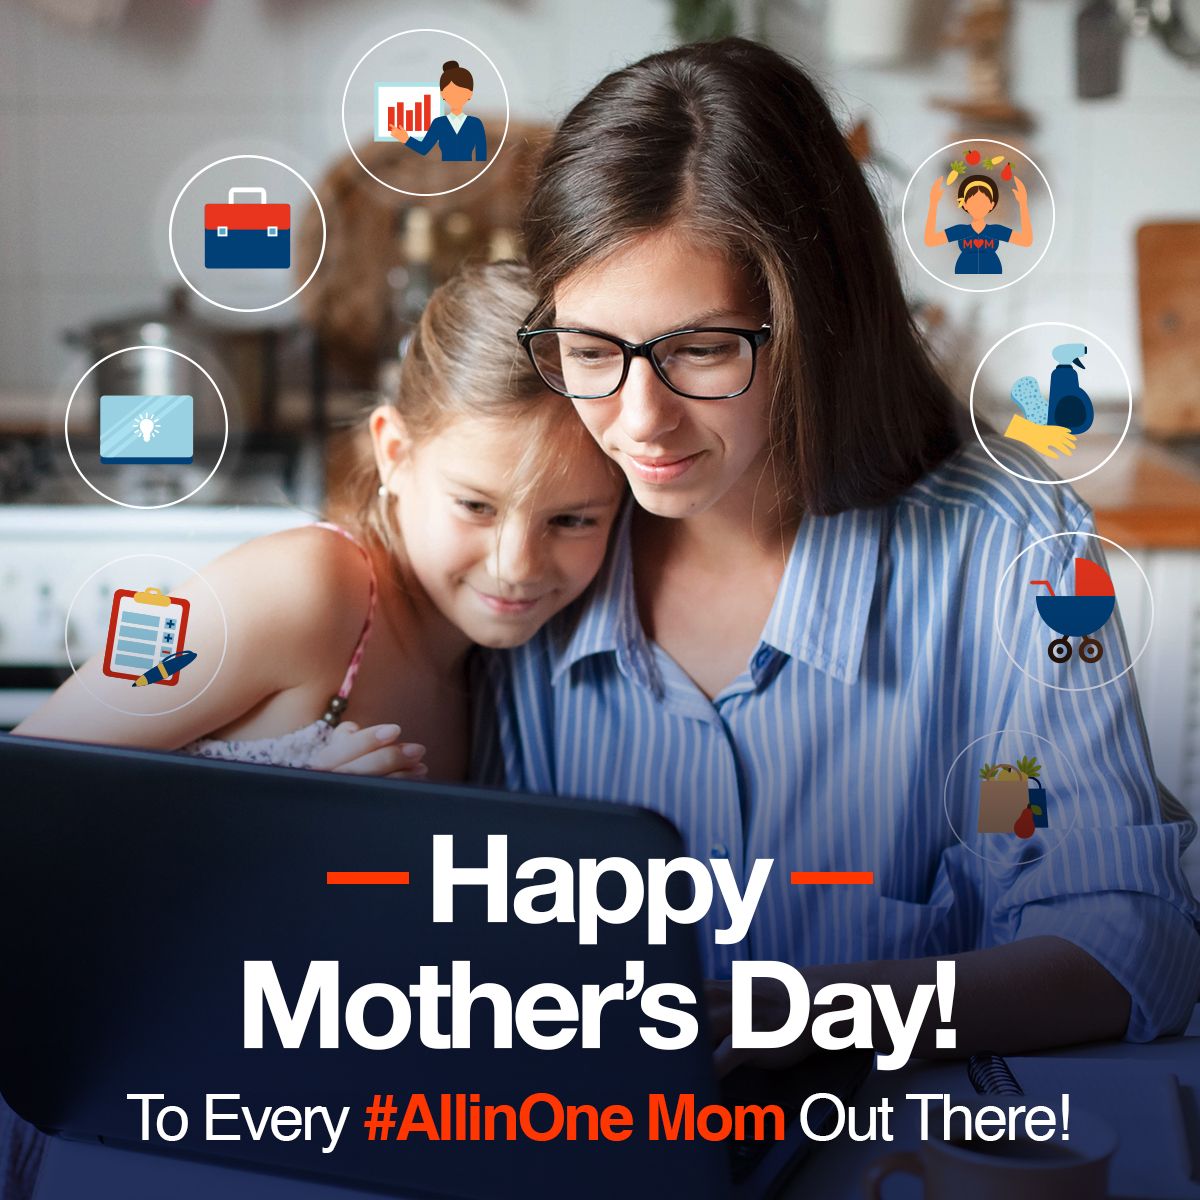 Happy Mother's Day! To Every #AllinOne Mom Out There!